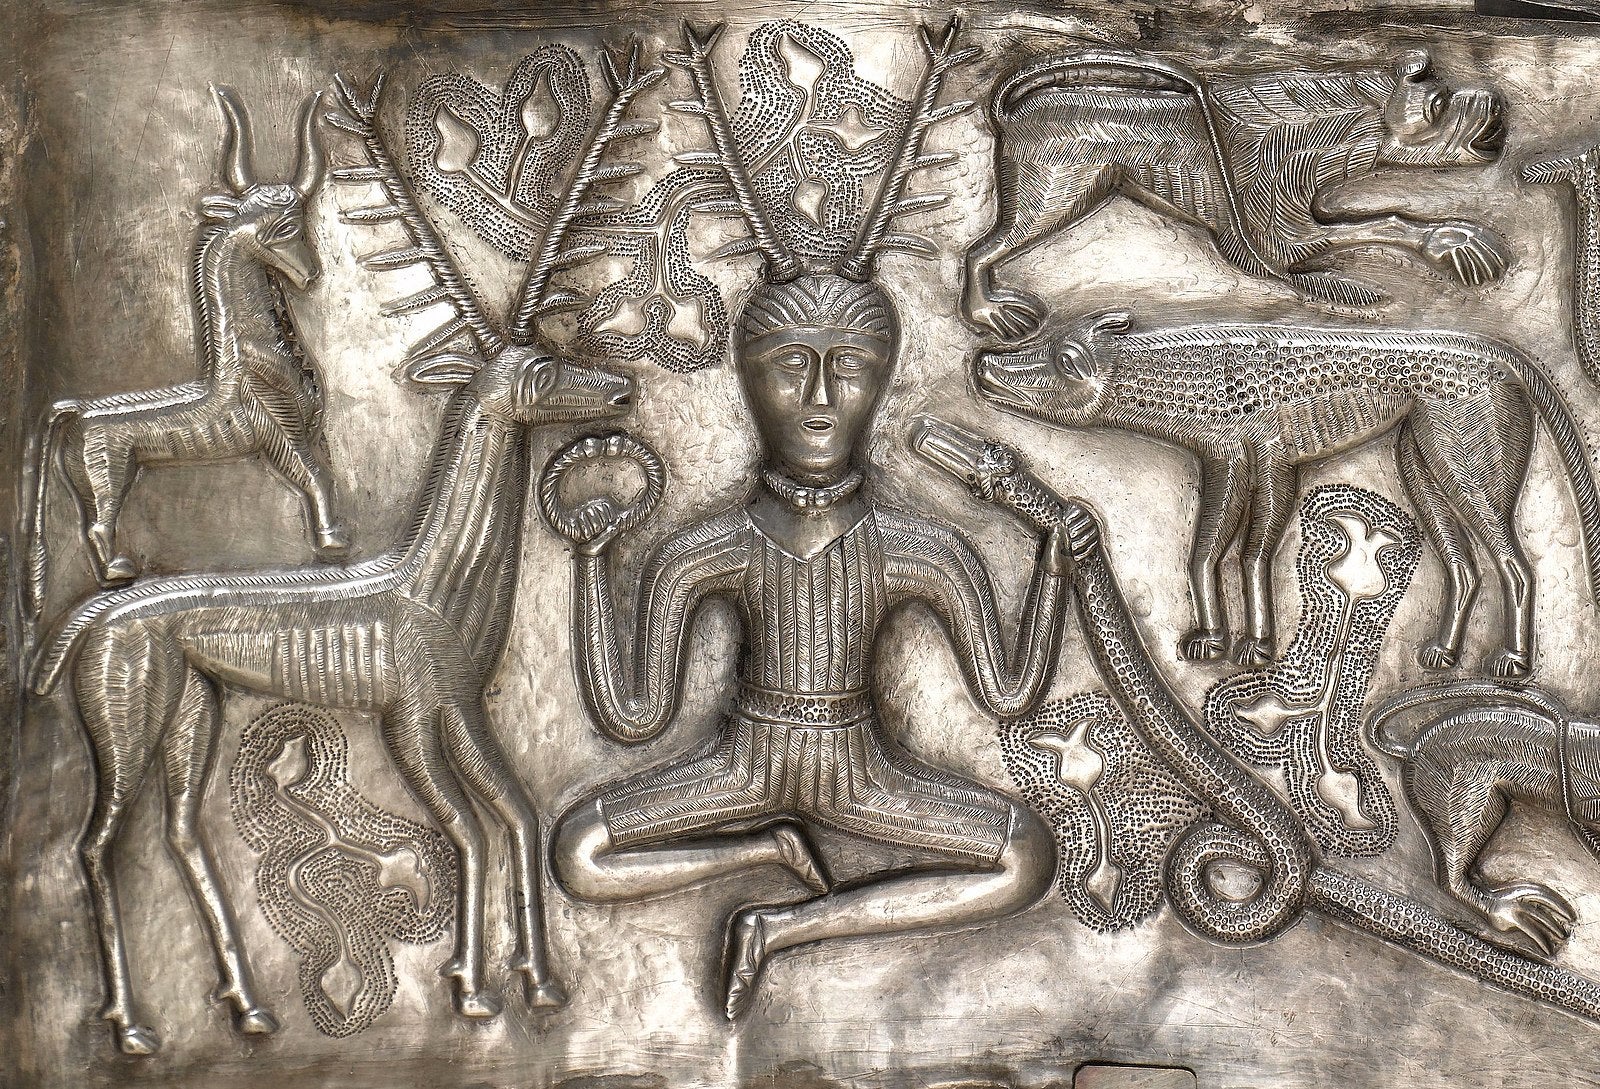 This antler-adorned potential shaman, surrounded by animals, is portrayed on a Thracian (ancient Bulgarian) silver cauldron. Interestingly, he is portrayed in a seated position. The cauldron was found in a peat bog in Denmark – and is now in that country’s national museum in Copenhagen